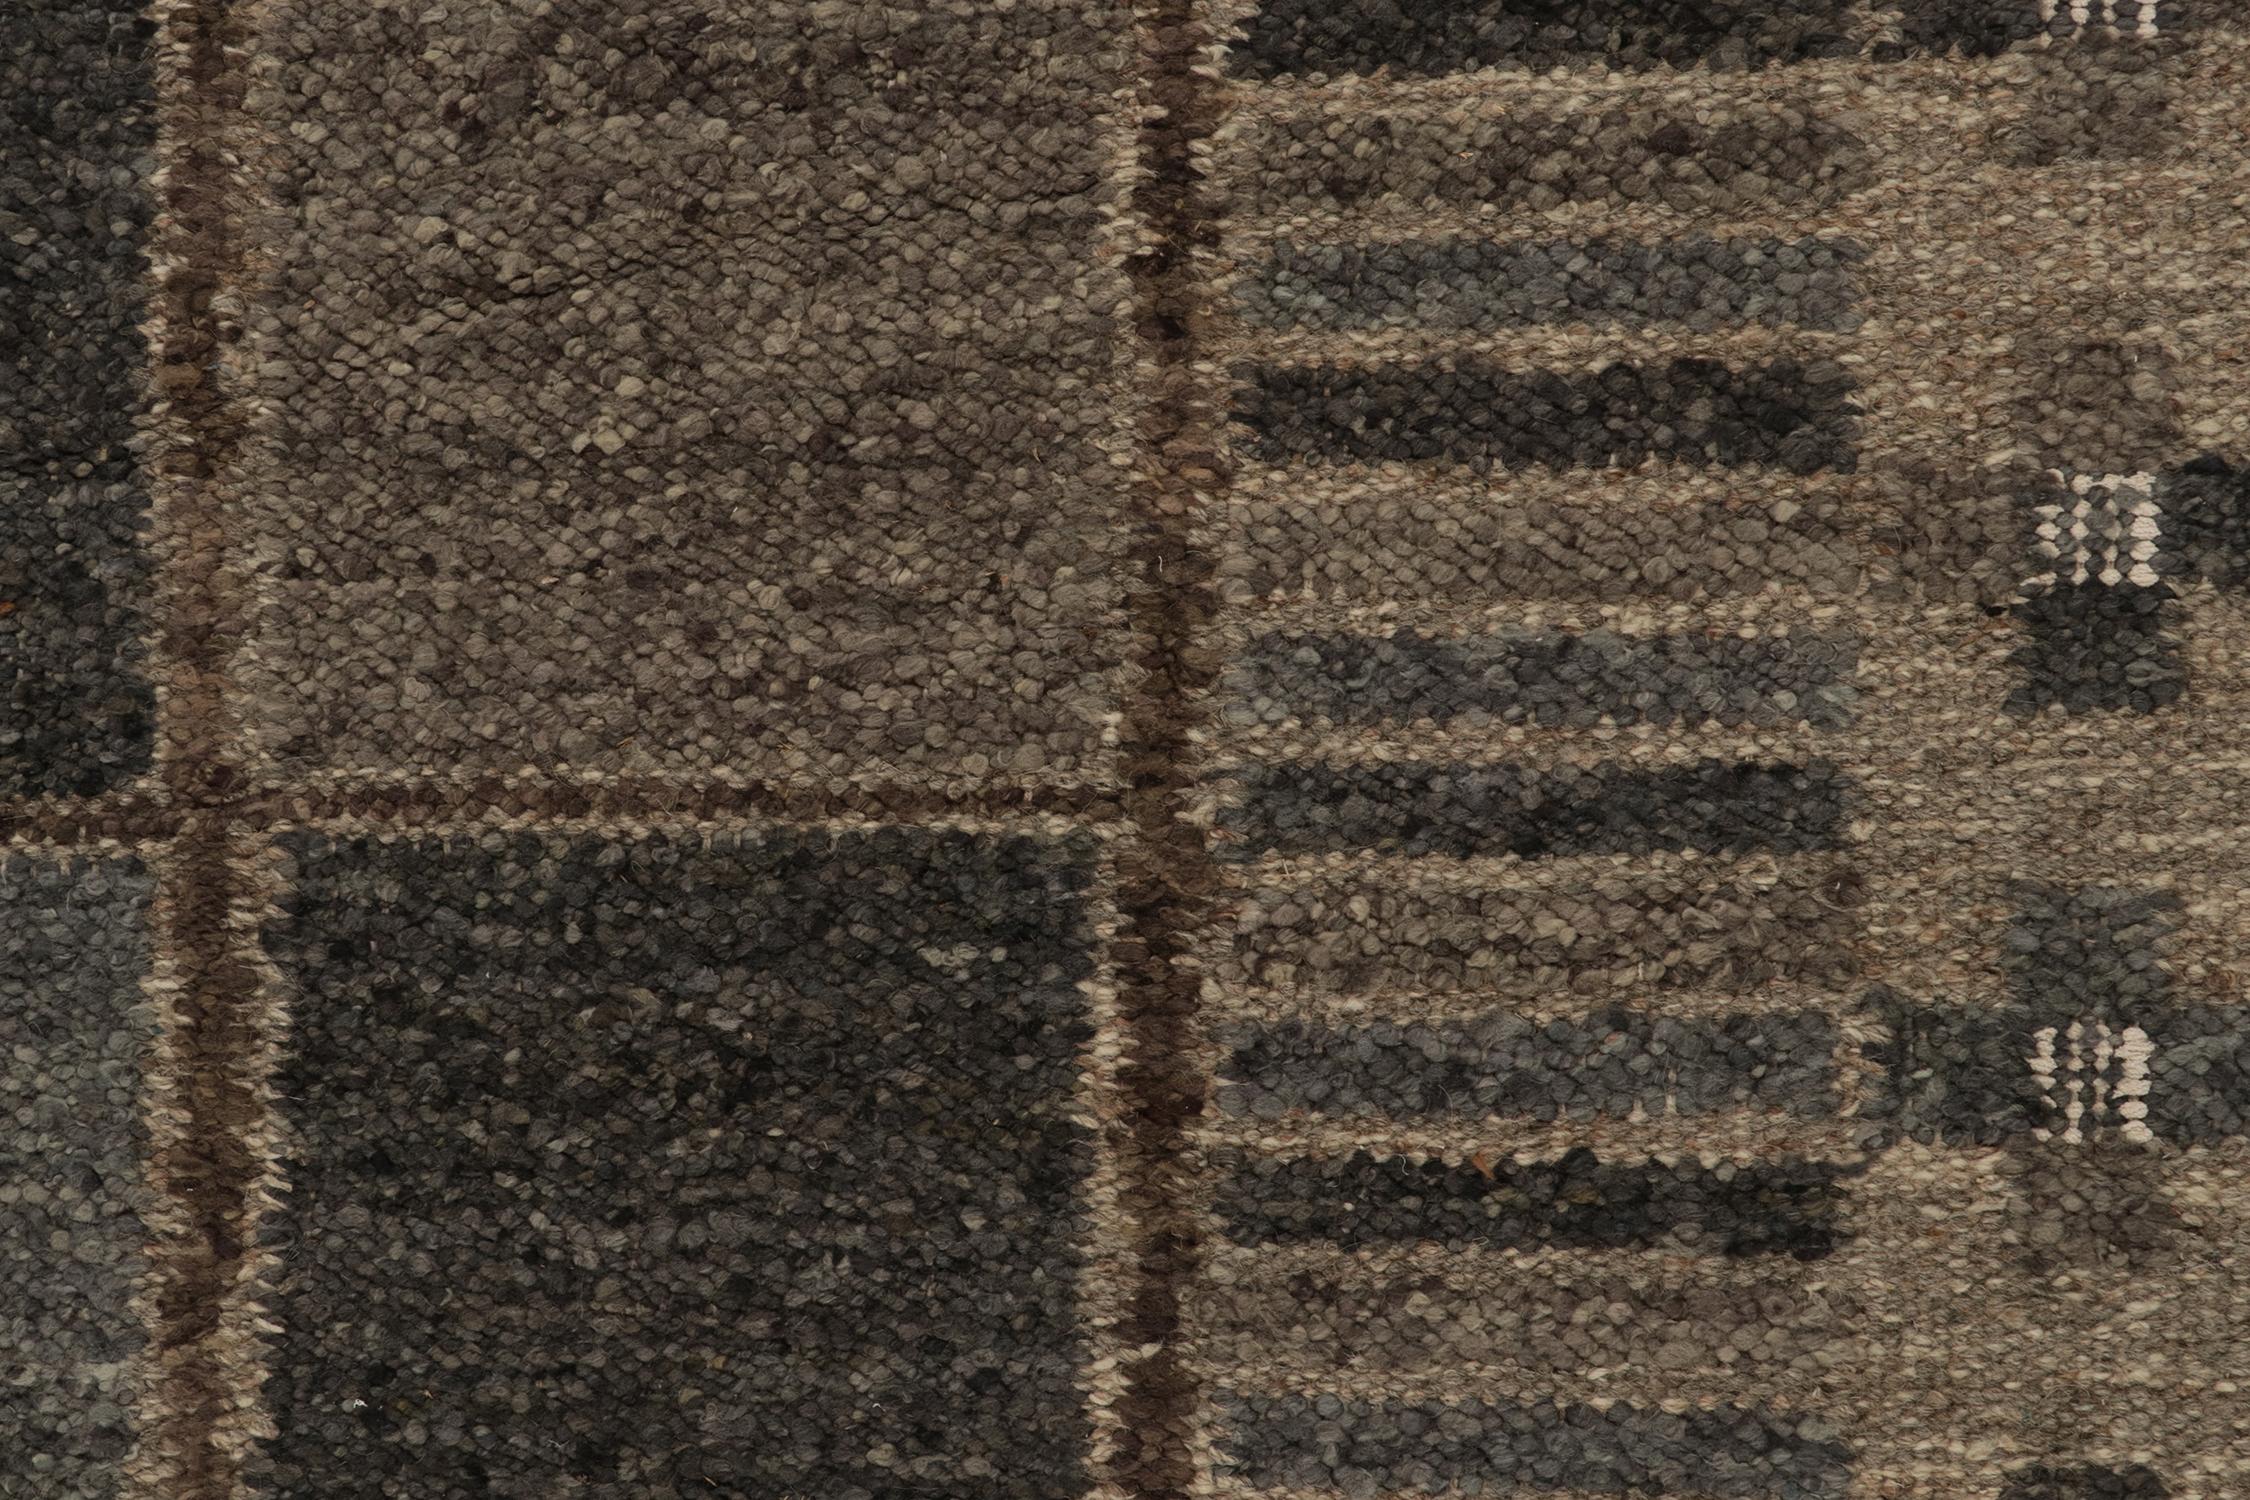 Rug & Kilim’s Scandinavian Style Kilim in Slate & Beige-Brown Geometric Pattern In New Condition For Sale In Long Island City, NY